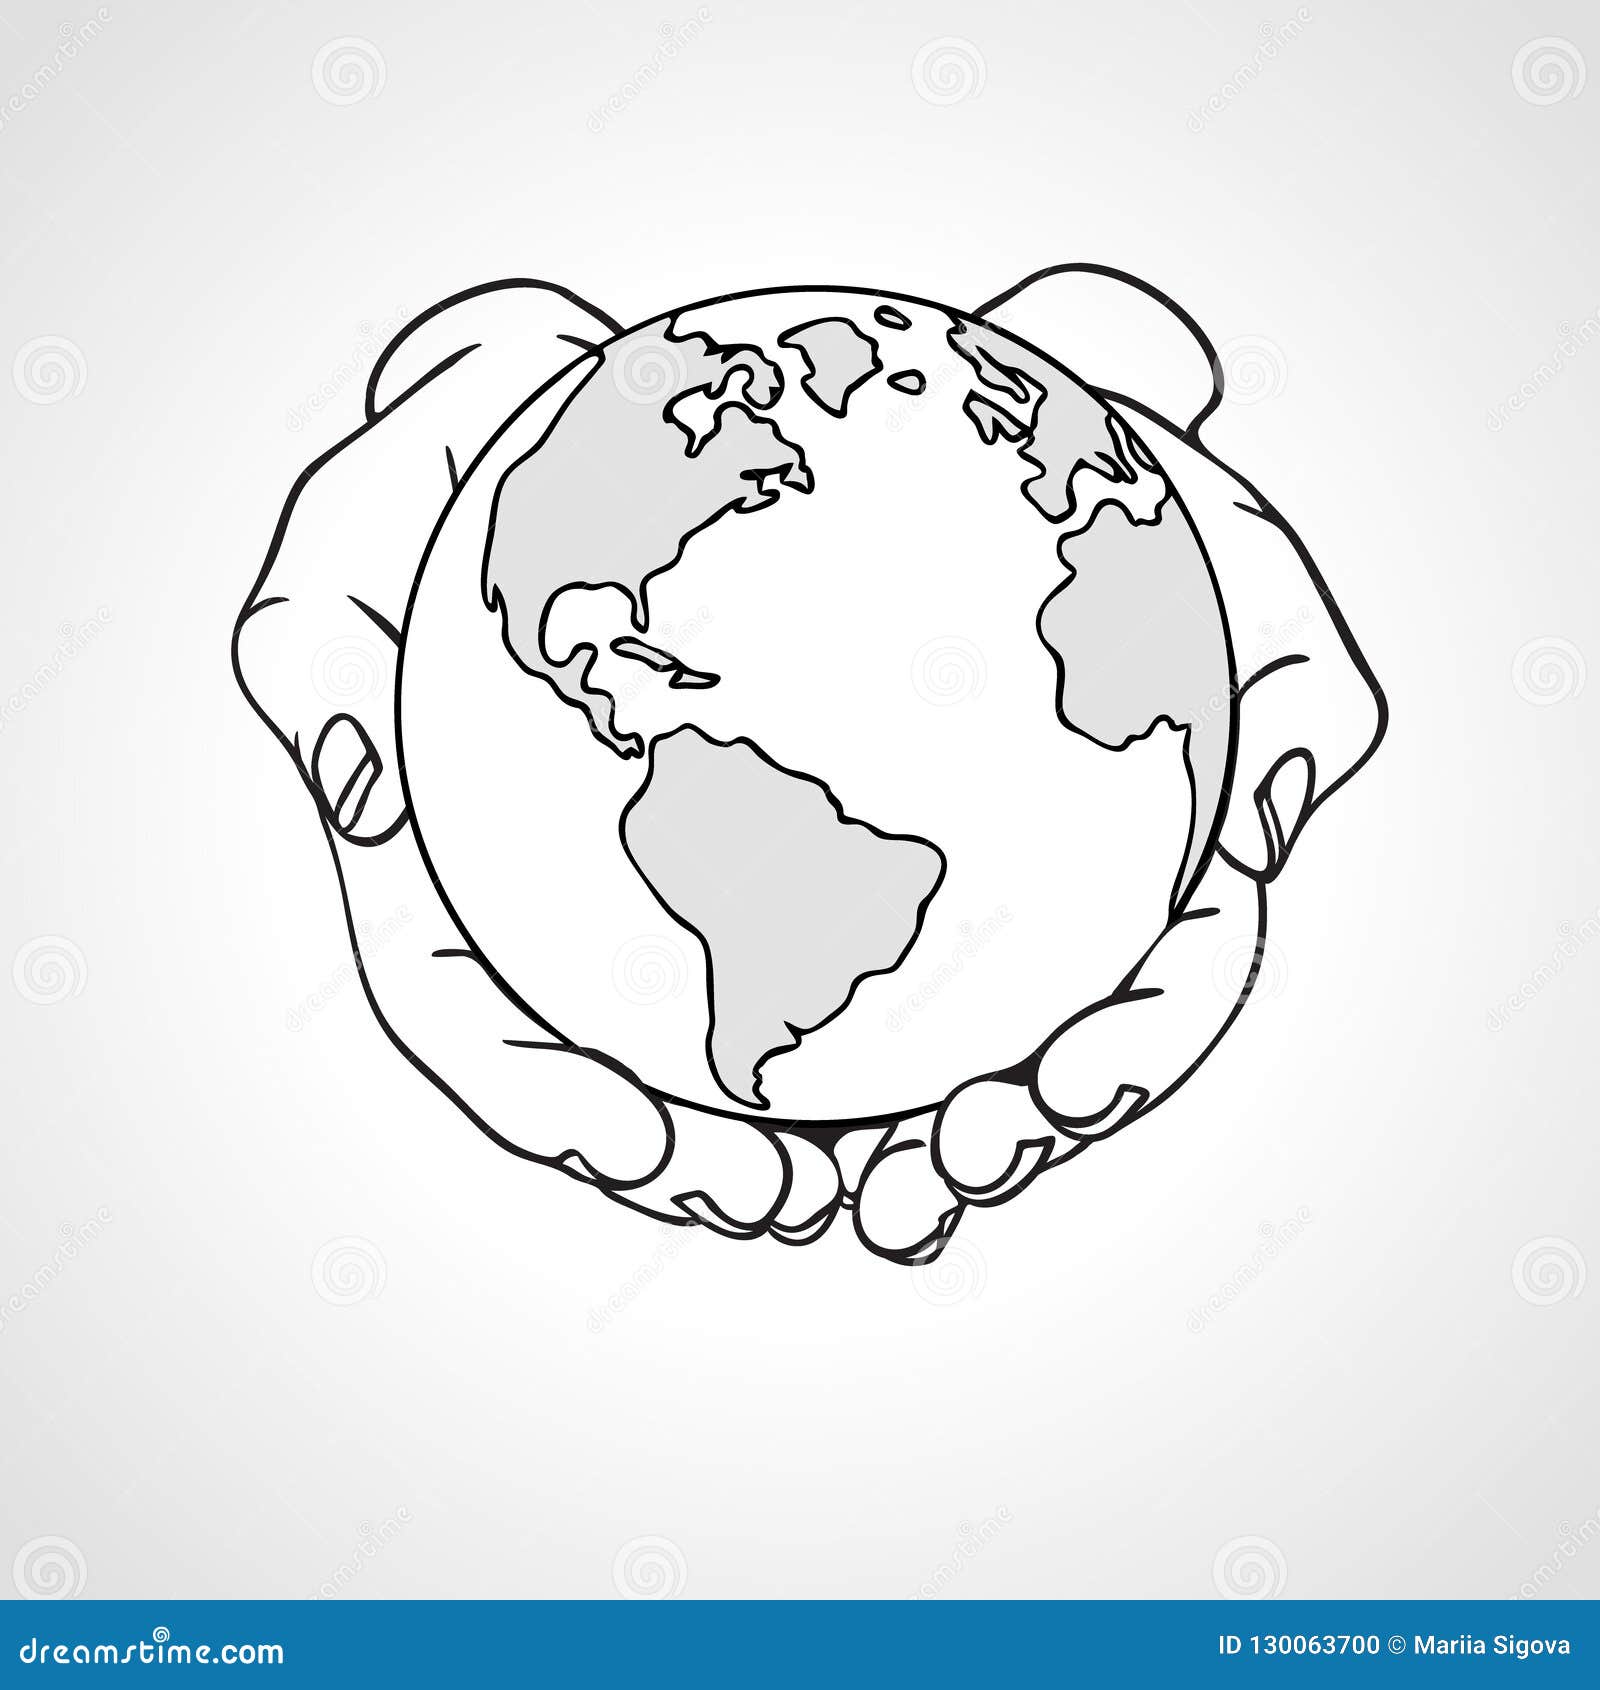 Hands Holding The Earth. 